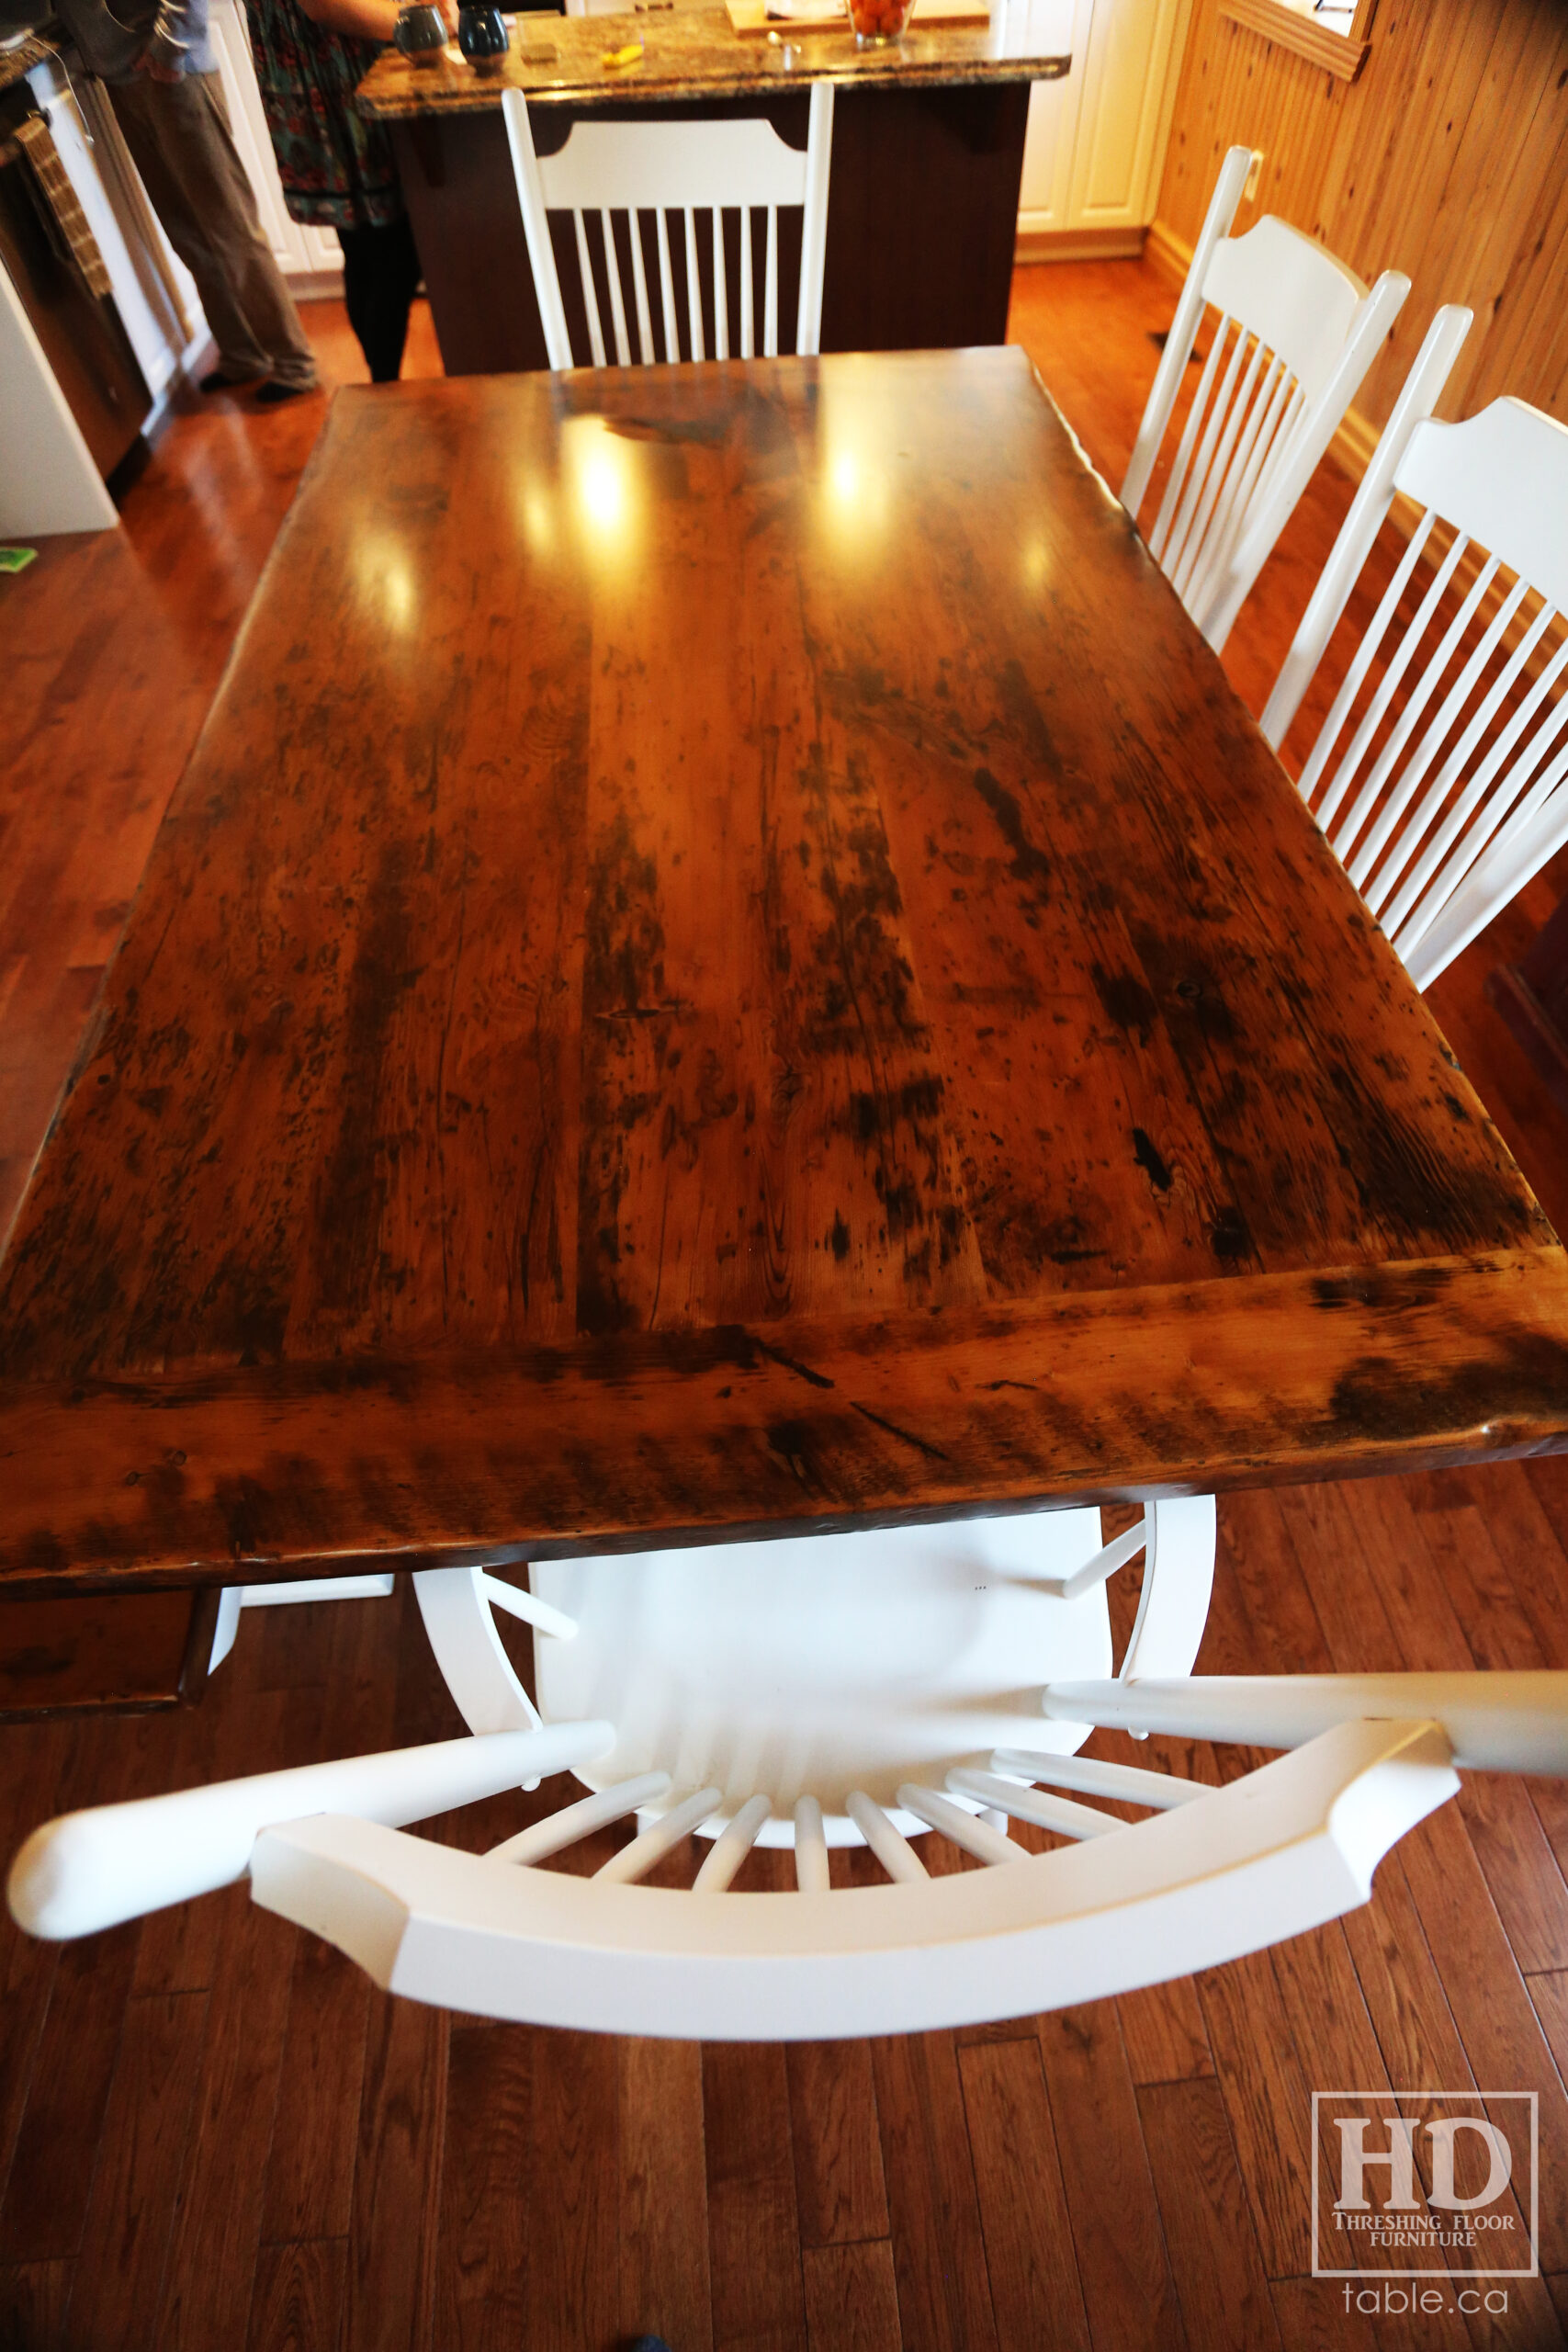 6' Reclaimed Ontario Barnwood Trestle Table we made for a Green Valley, Ontario Home - 42" deep - Trestle Base - Old Growth Hemlock Threshing Floor Construction - Original edges & distressing maintained - White painted base option - Premium epoxy + matte polyurethane finish - [Matching] 6' Bench - [4] Buckhorn Chairs - www.table.ca